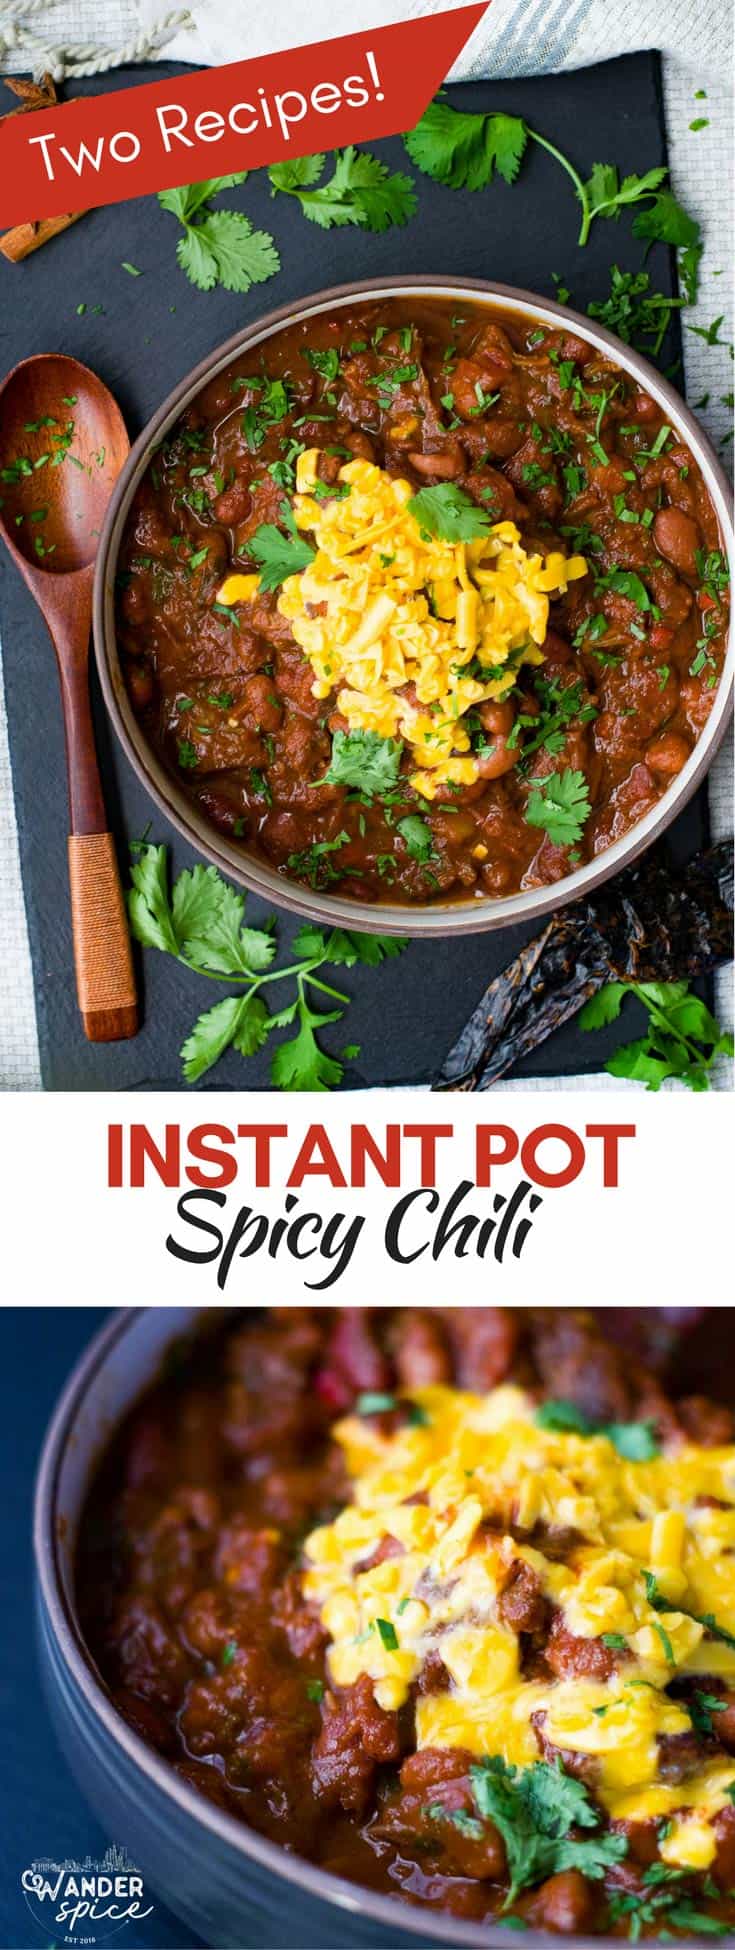 Easy Instant Pot Chili Recipe with Ground Beef